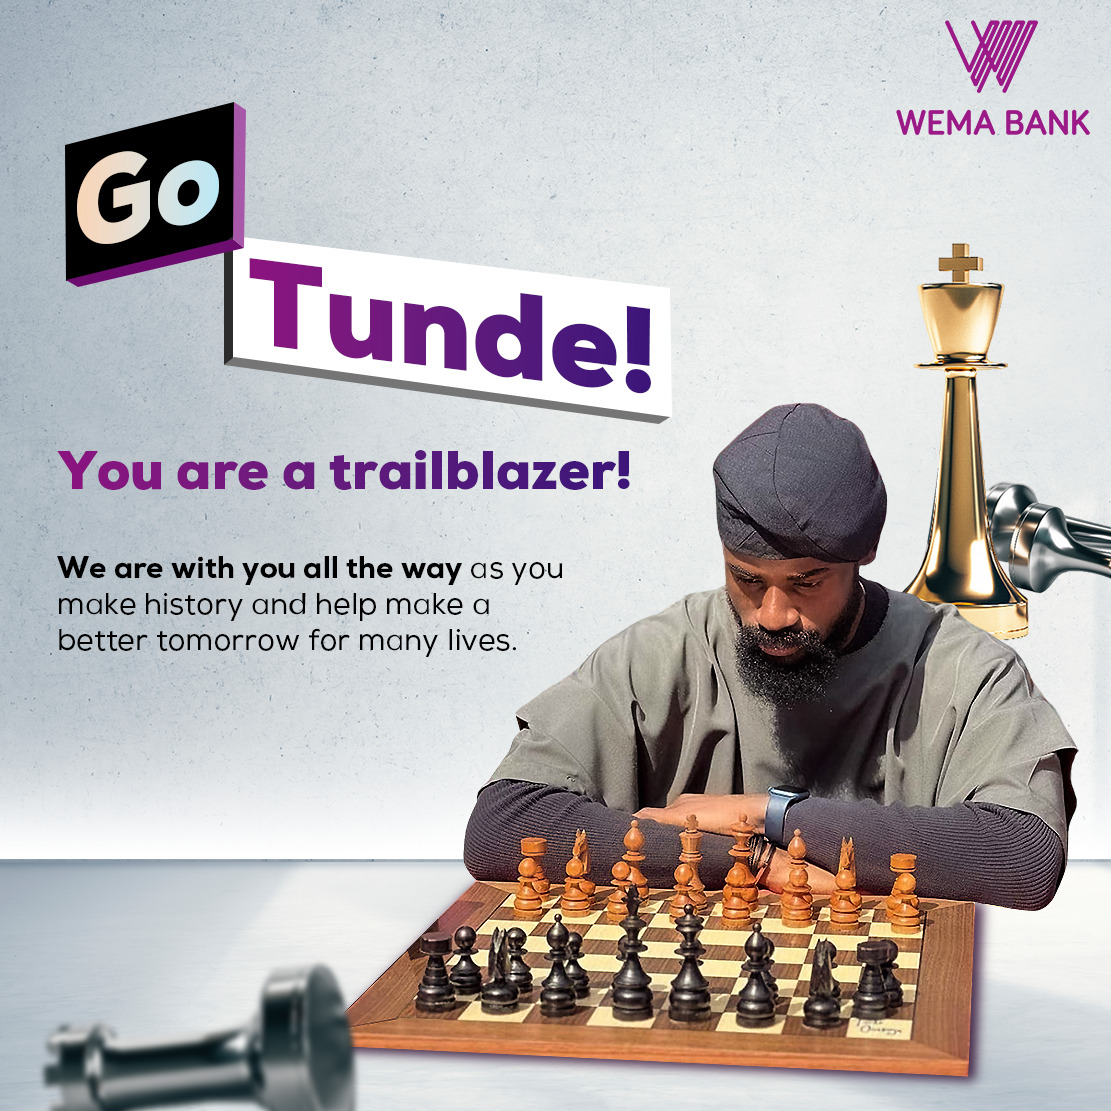 Celebrating stars is what we do best at Wema Bank. Join us in cheering on Tunde as he makes history because we're backing him every step of the way! #WemaBank #TundeMakingHistory #Tunde58hoursofChess #TundeChessMarathon @Tunde_OD